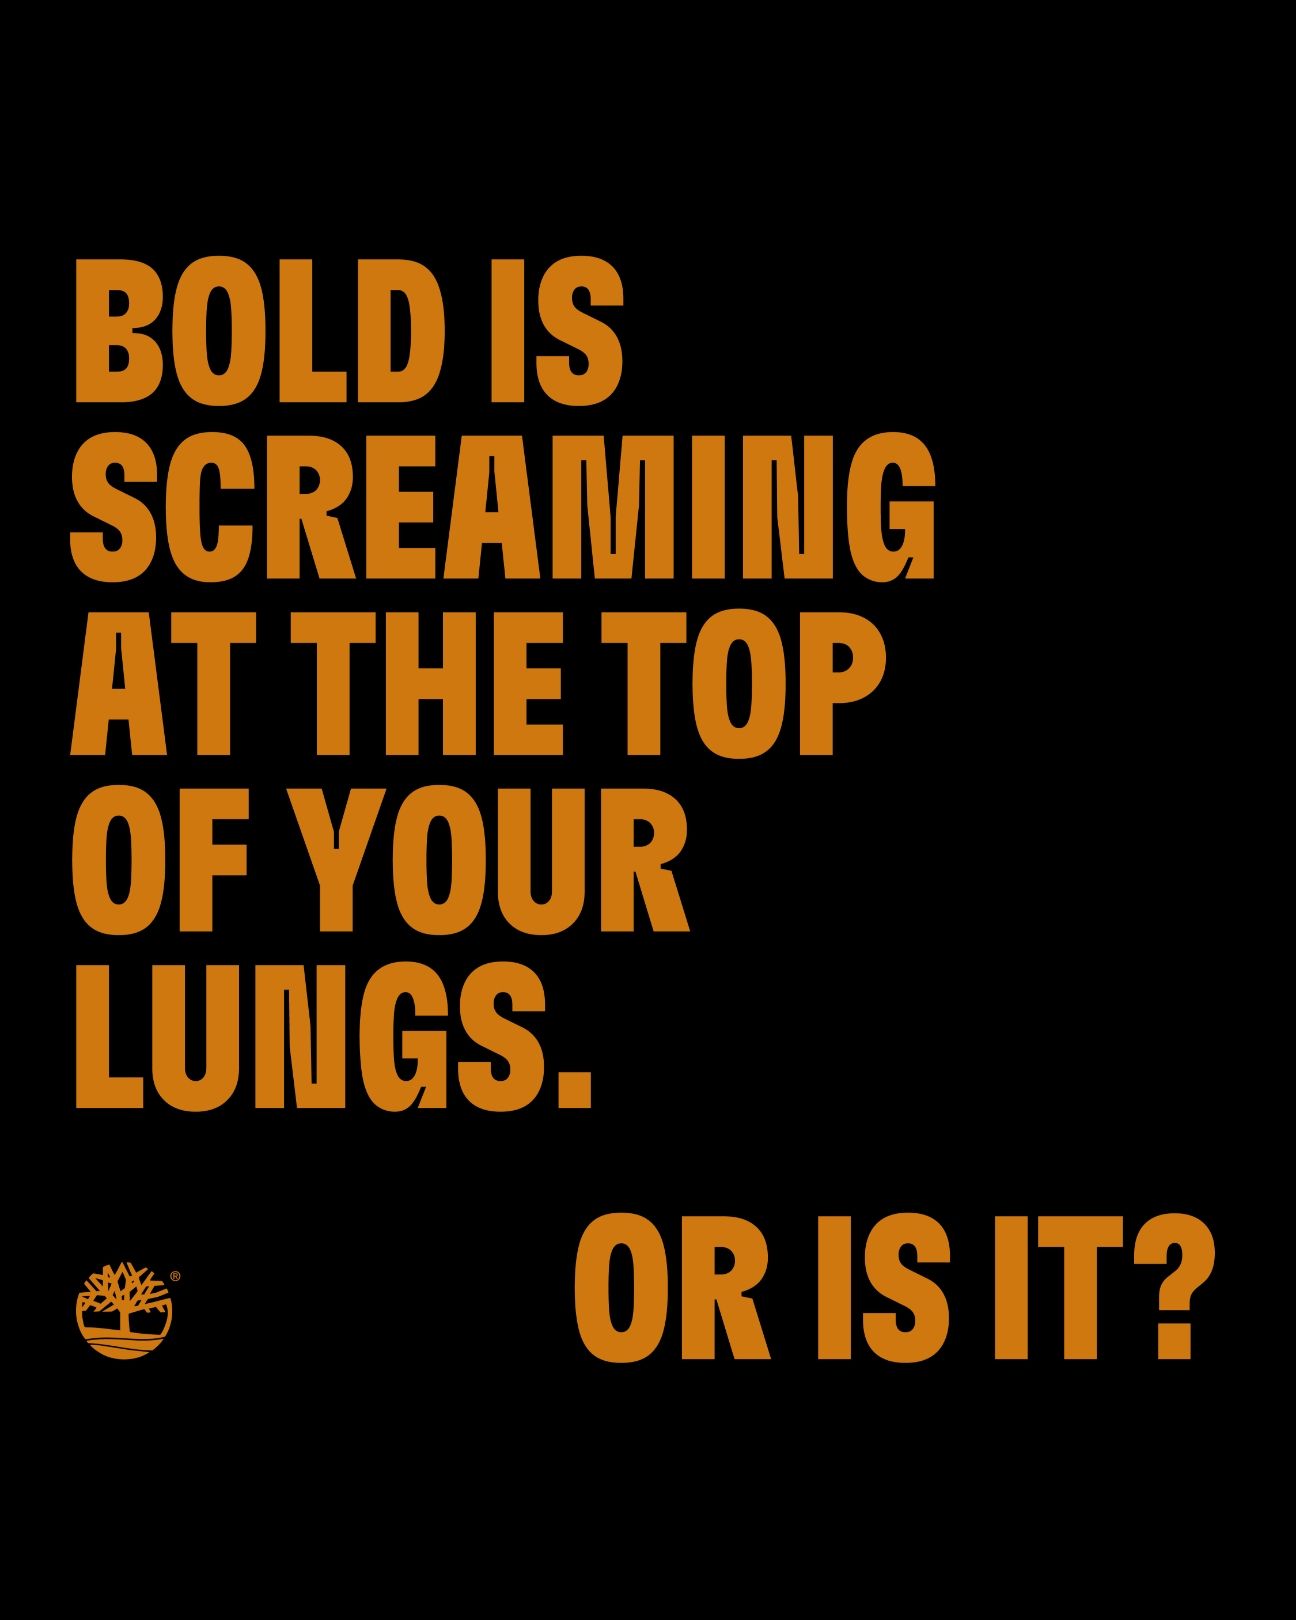 Bold is screaming at the top of your lungs. or is it?